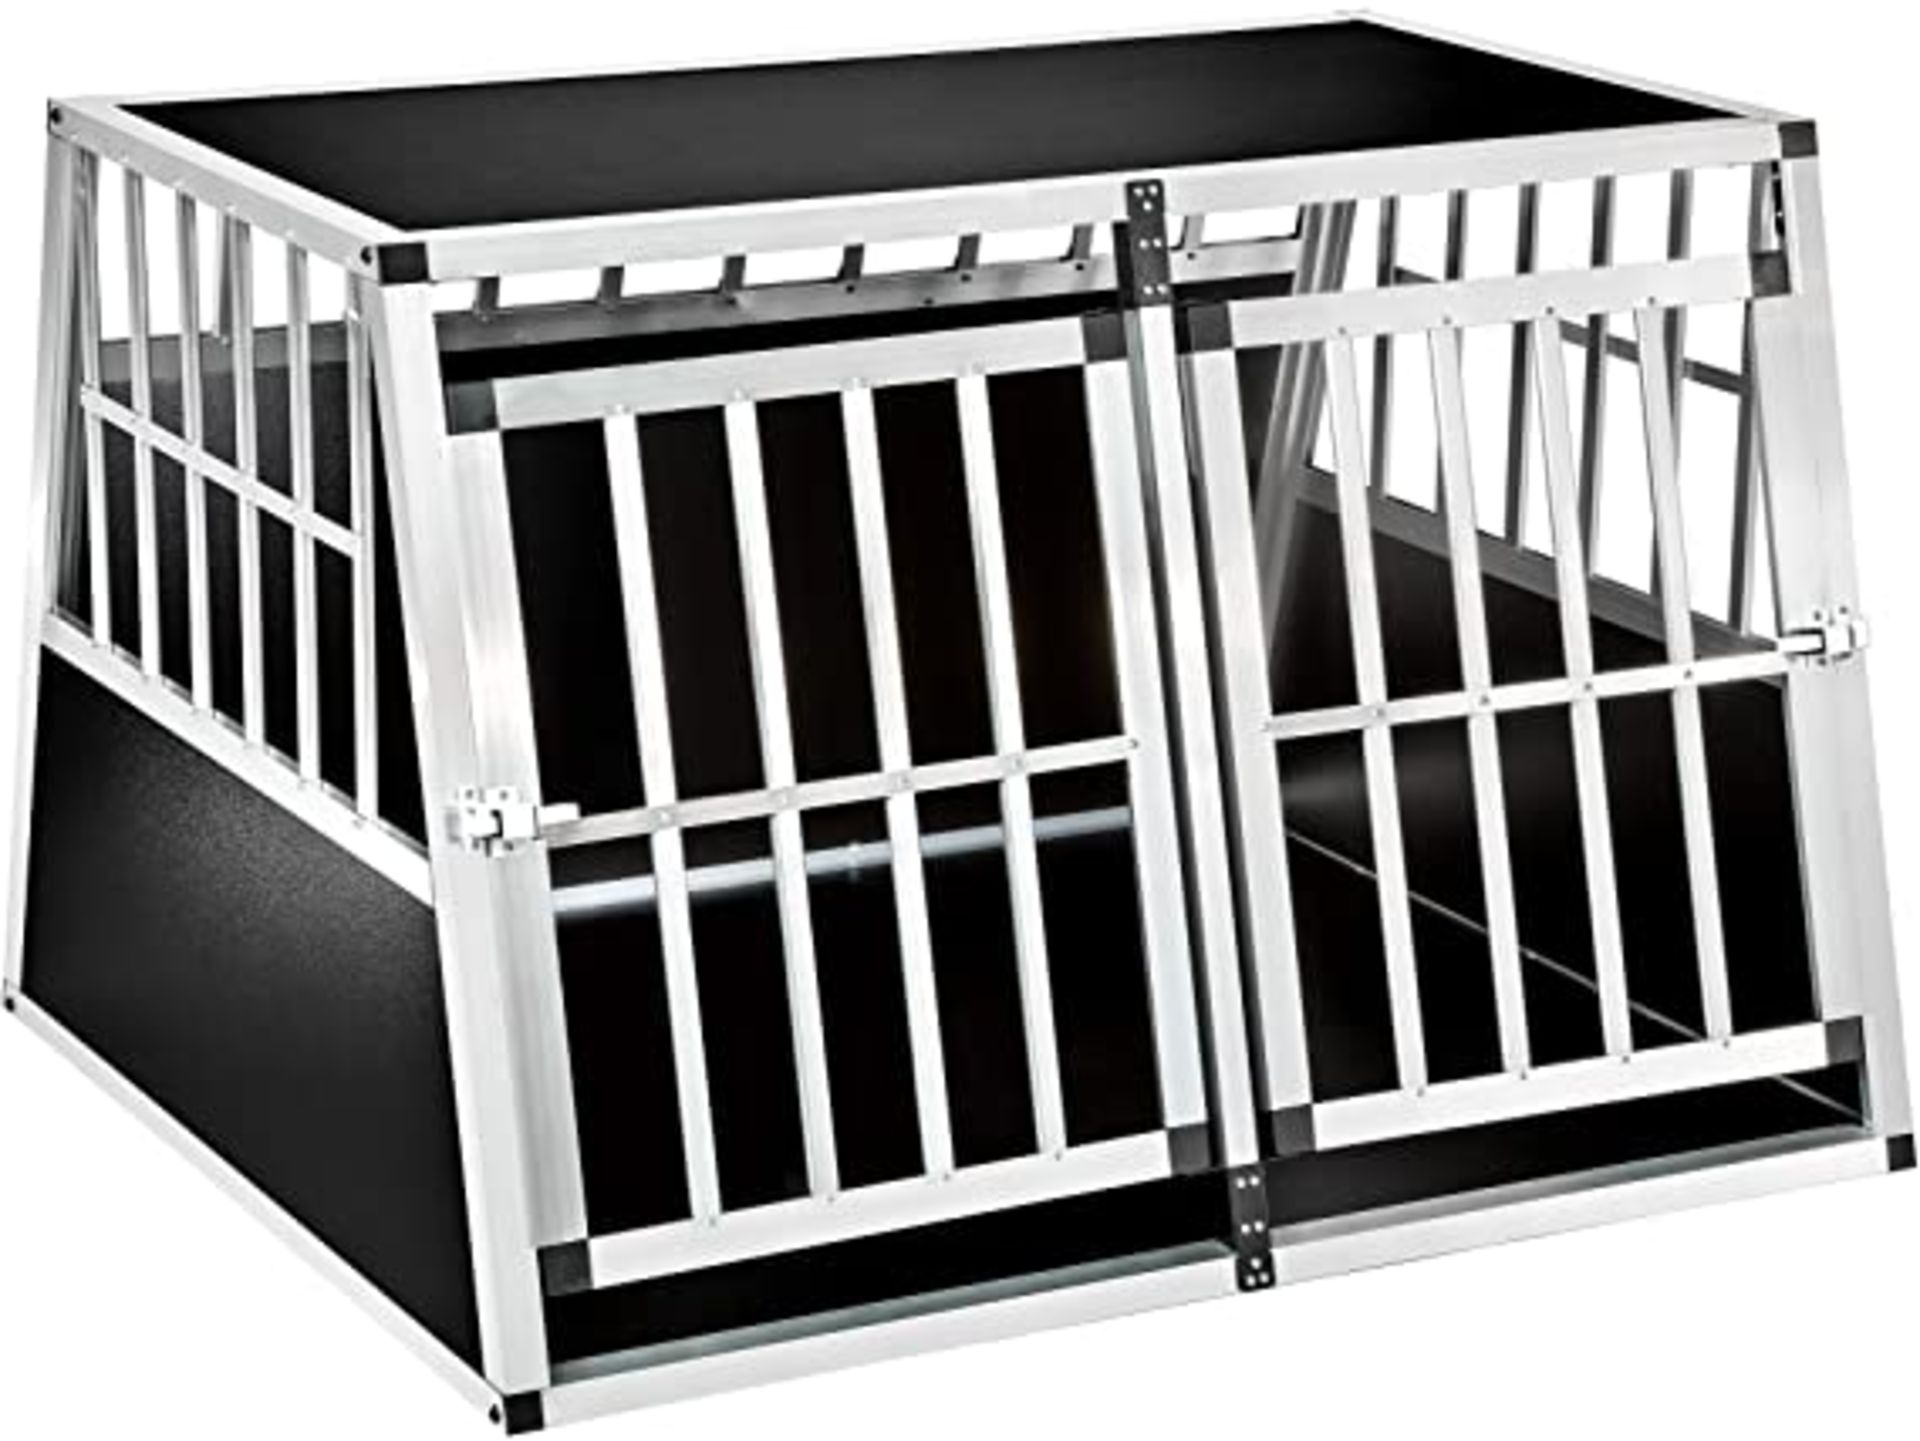 Tectake - Double Dog Crate Bobby - Boxed. RRP £169.00